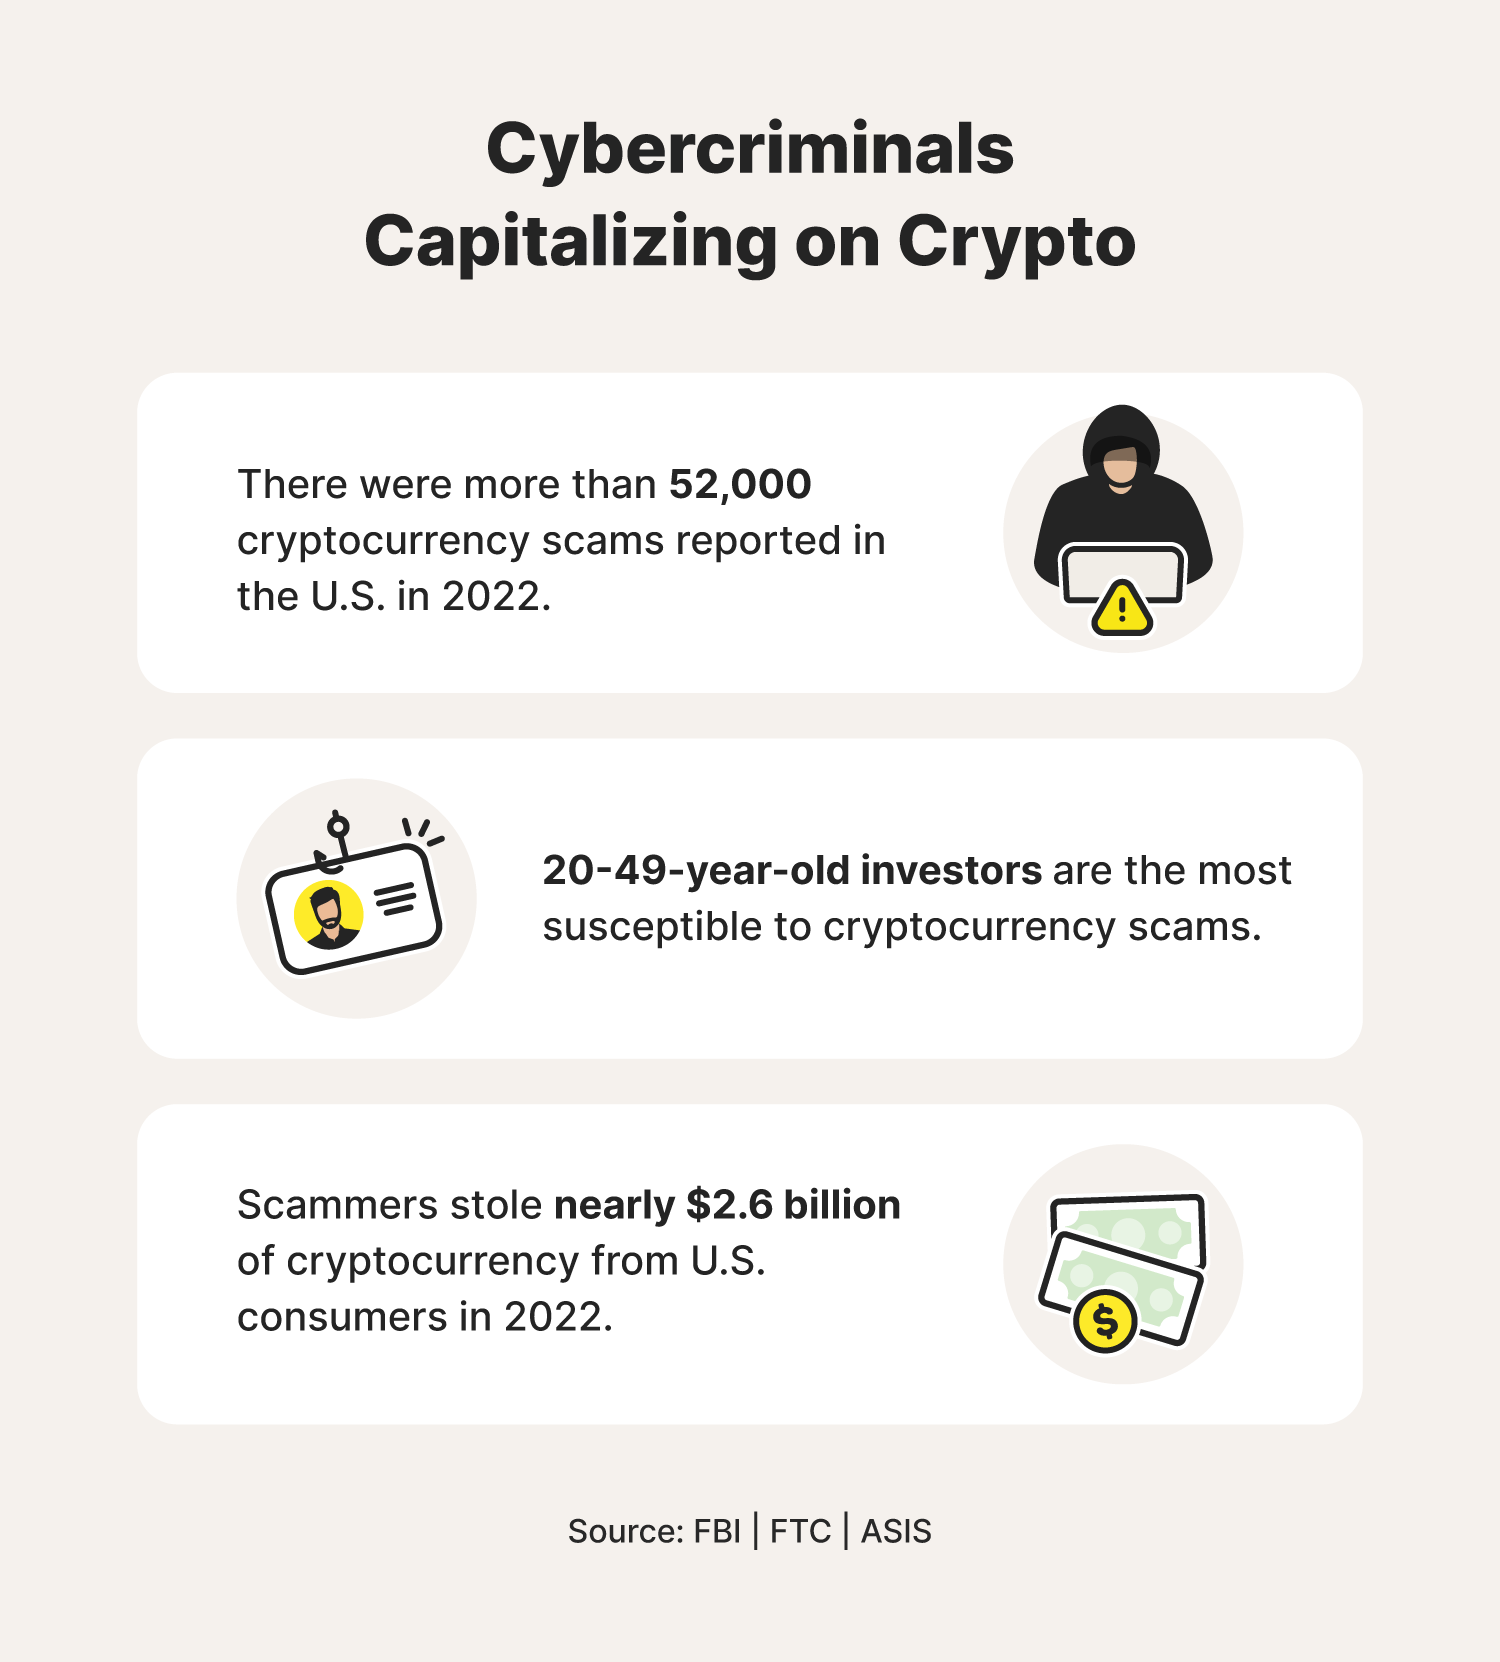 Illustrated chart providing information about how cybercriminals capitalize on cryptocurrency.